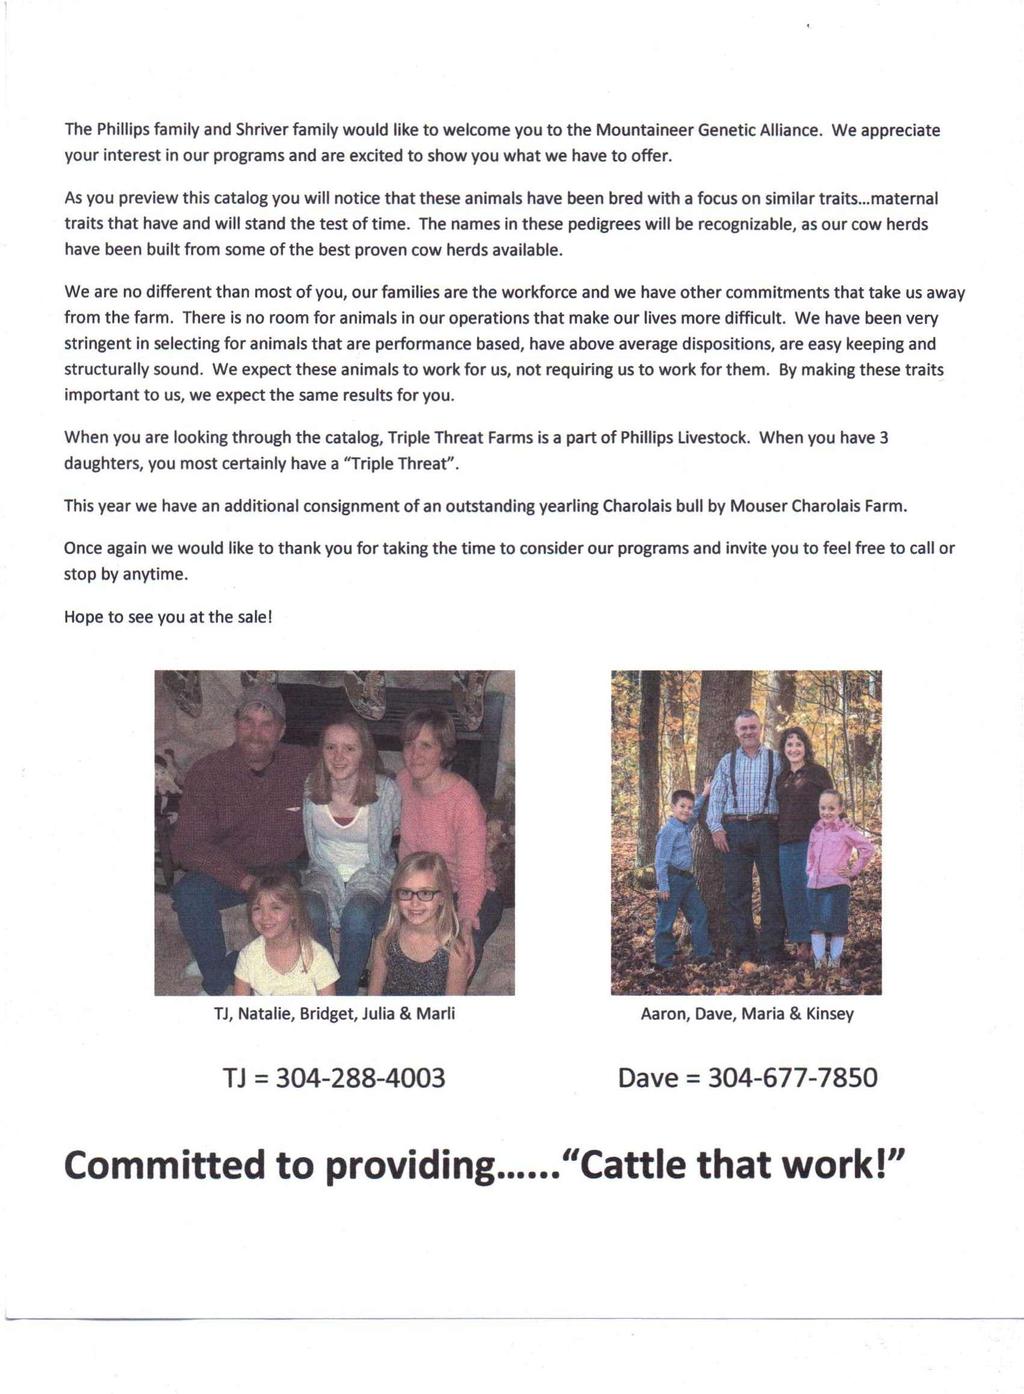 The Phillips family and Shriver family would like to welcome you to the Mountaineer Genetic Alliance. We appreciate your interest in our programs and are excited to show you what we have to offer.